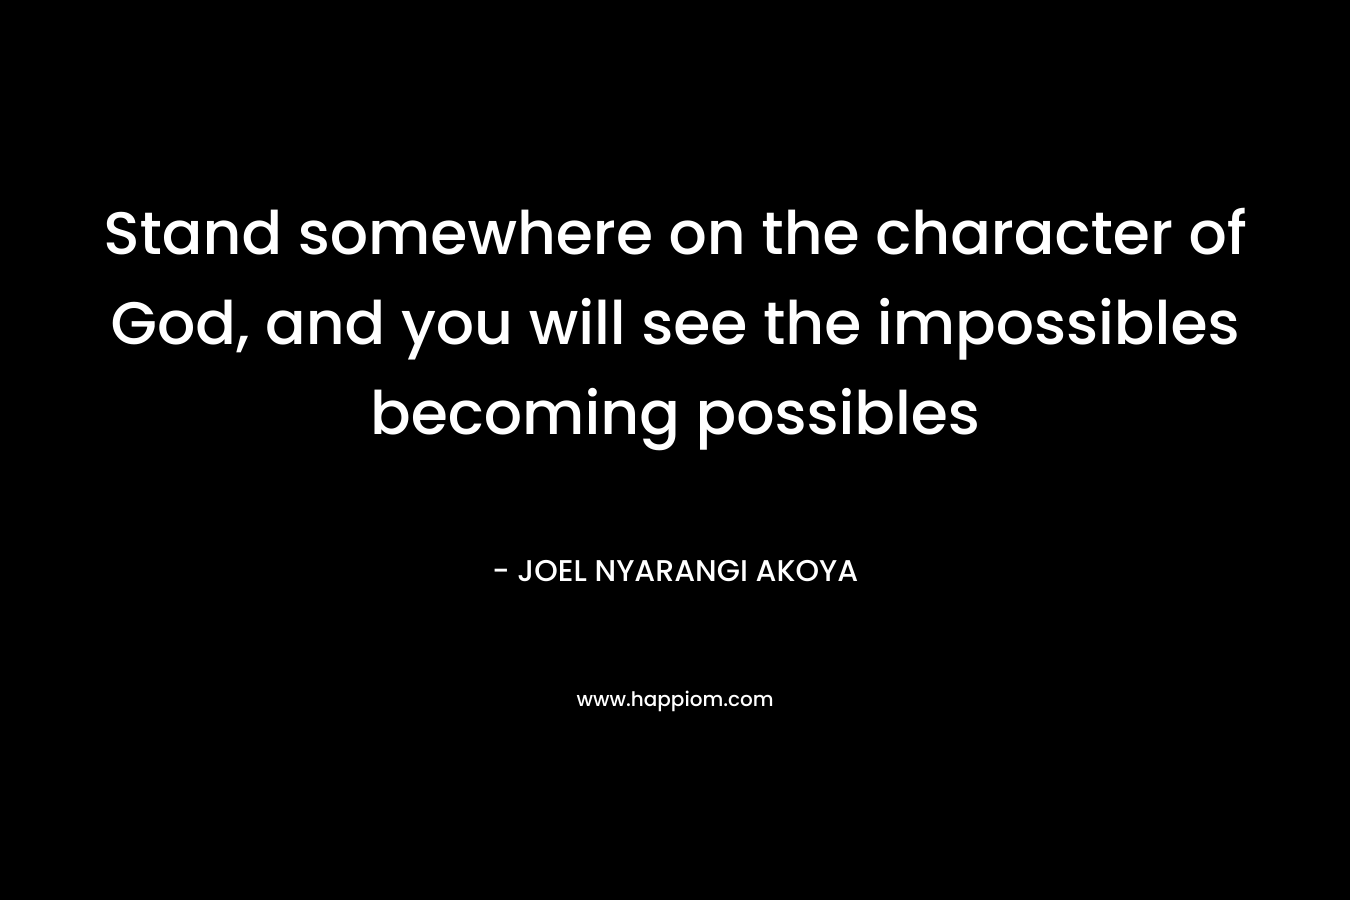 Stand somewhere on the character of God, and you will see the impossibles becoming possibles – JOEL NYARANGI AKOYA